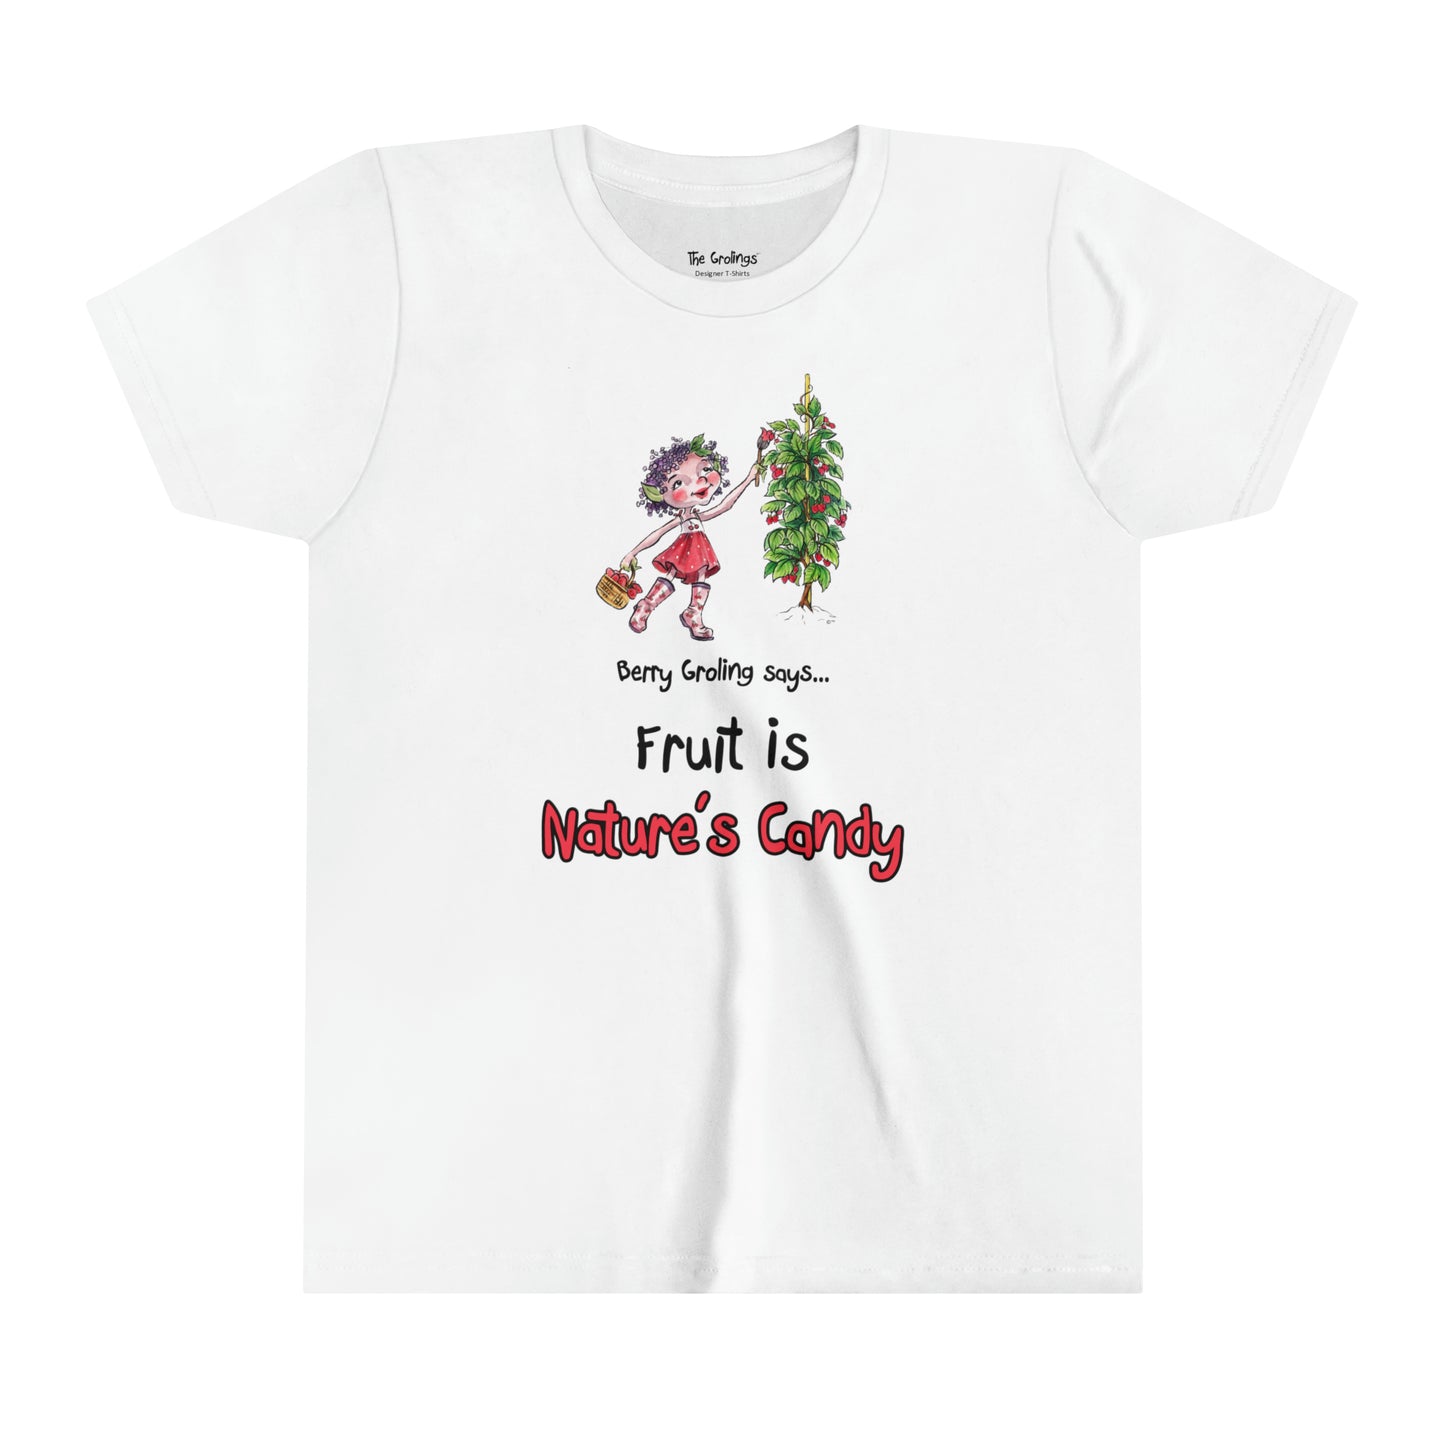 A white official Grolings kids' t-shirt, featuring the phrase 'Berry Groling says... Fruit is Nature’s Candy'. The t-shirt showcases Berry Groling, painting sweetness into raspberries on a bush. Berry Groling is holding a basket filled with fresh raspberries, capturing the abundance and delectable sweetness of nature's bounty. The scene encourages the wearer to appreciate and enjoy the natural delights provided by the Earth.